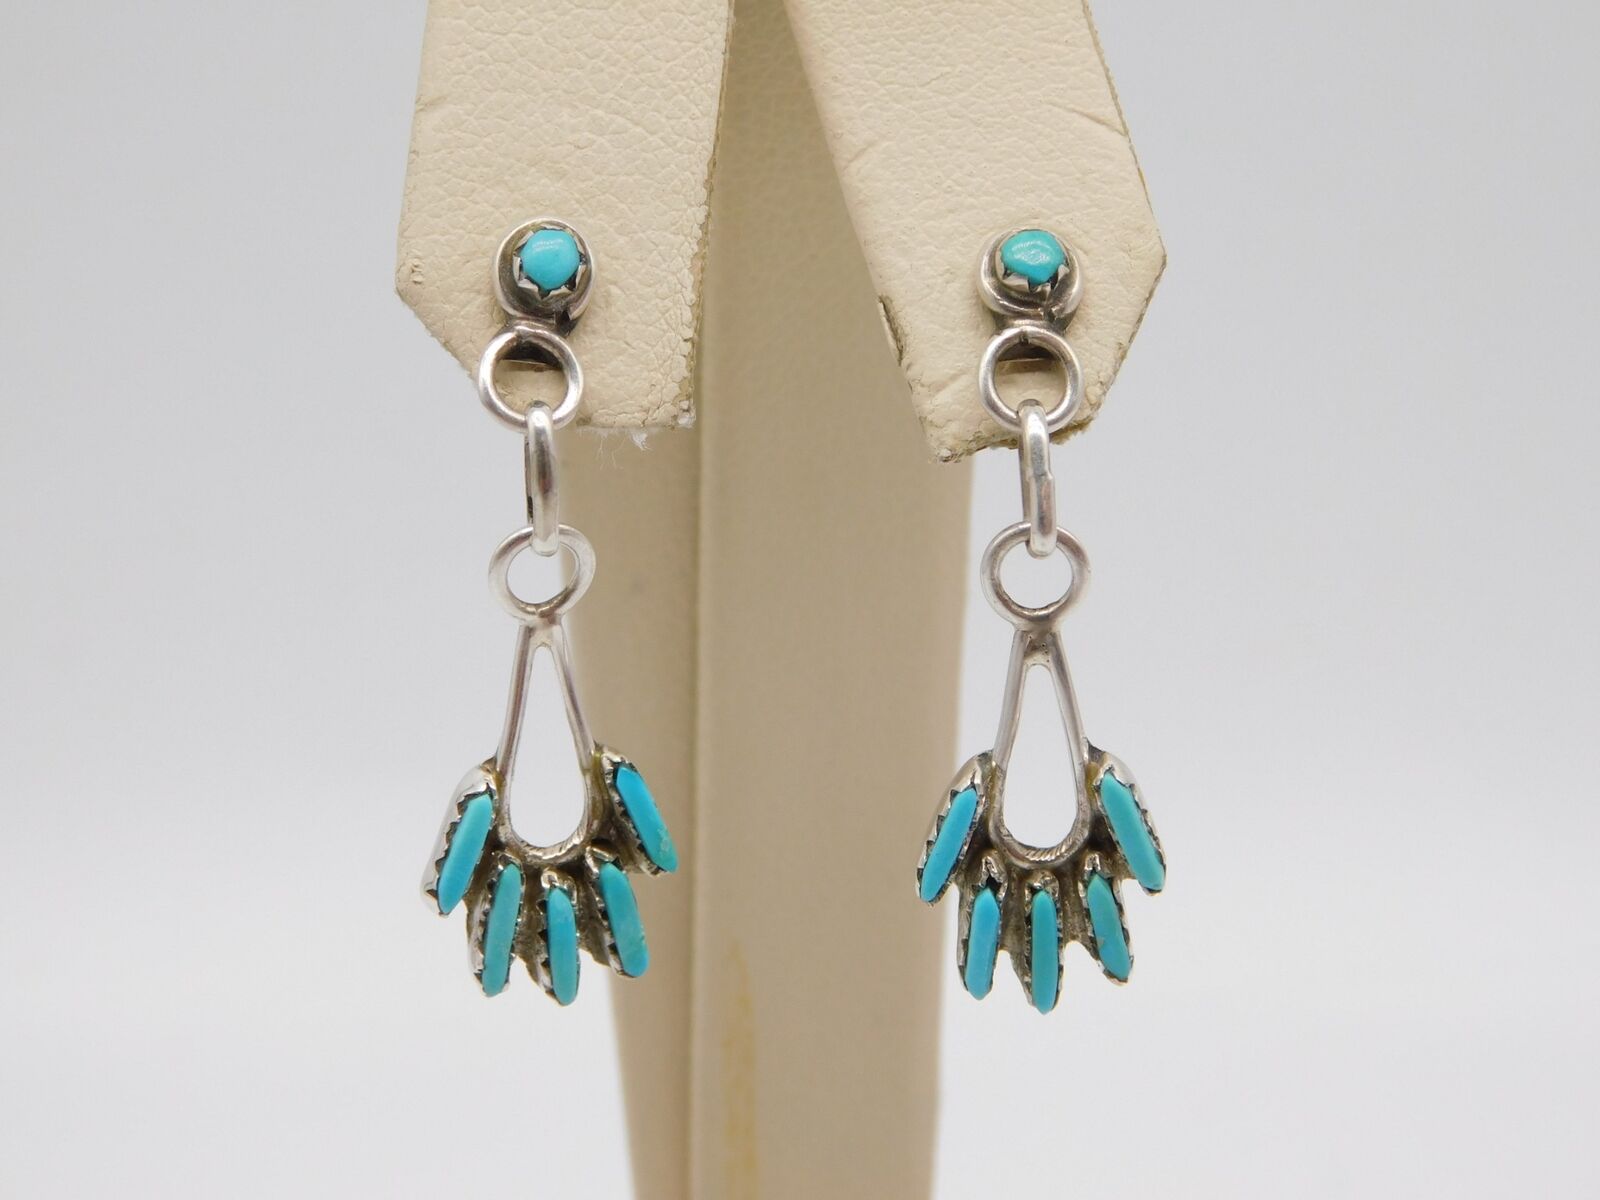 NATIVE AMERICAN INDIAN STERLING SILVER PETIT POINT TURQUOISE STONE EARRINGS